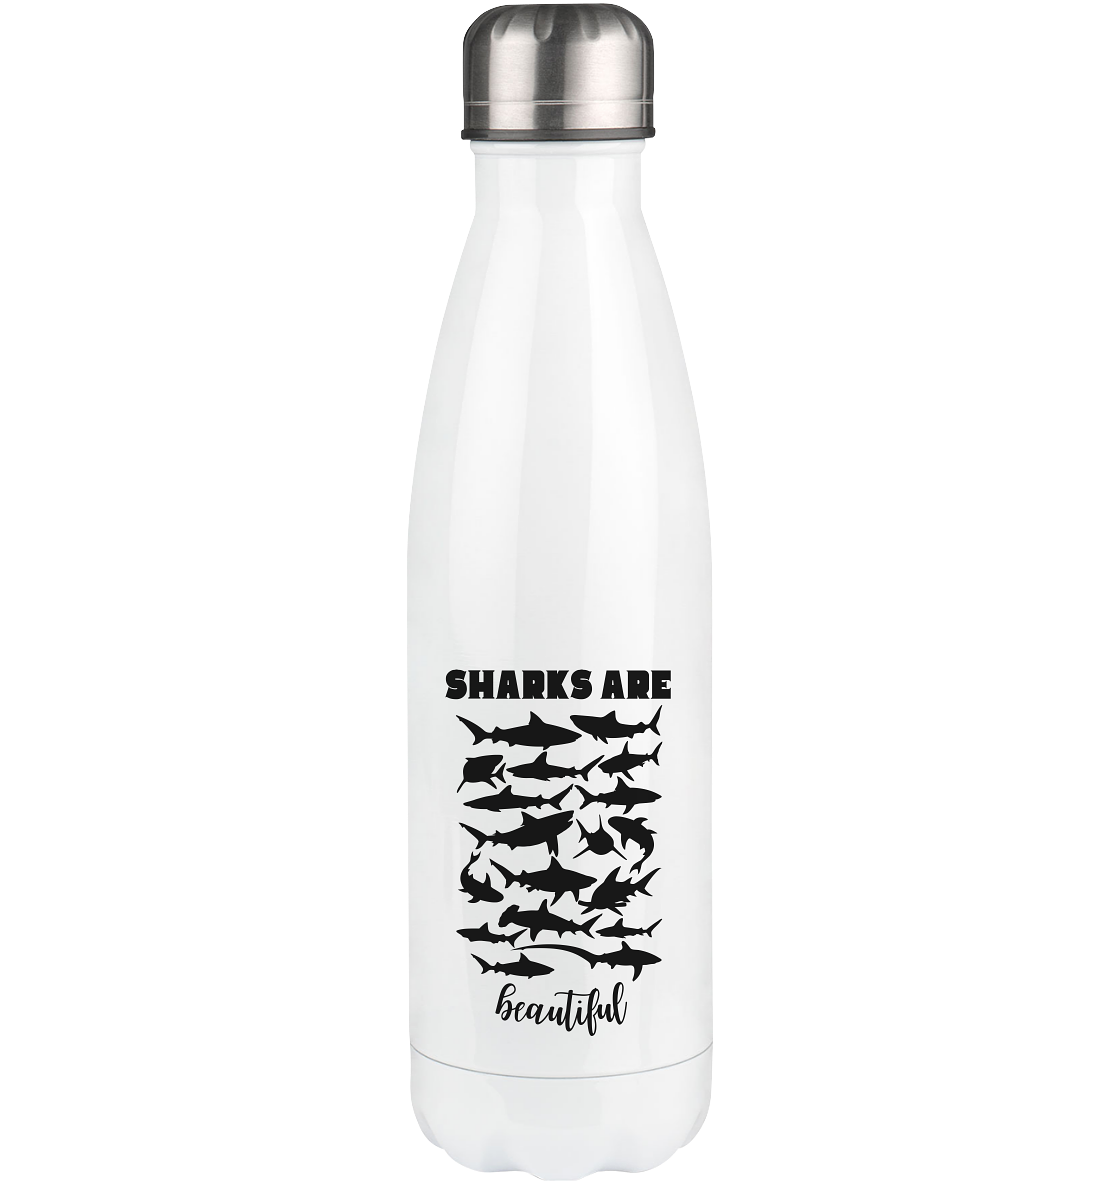 Sharks are beautiful - Thermoflasche 500ml